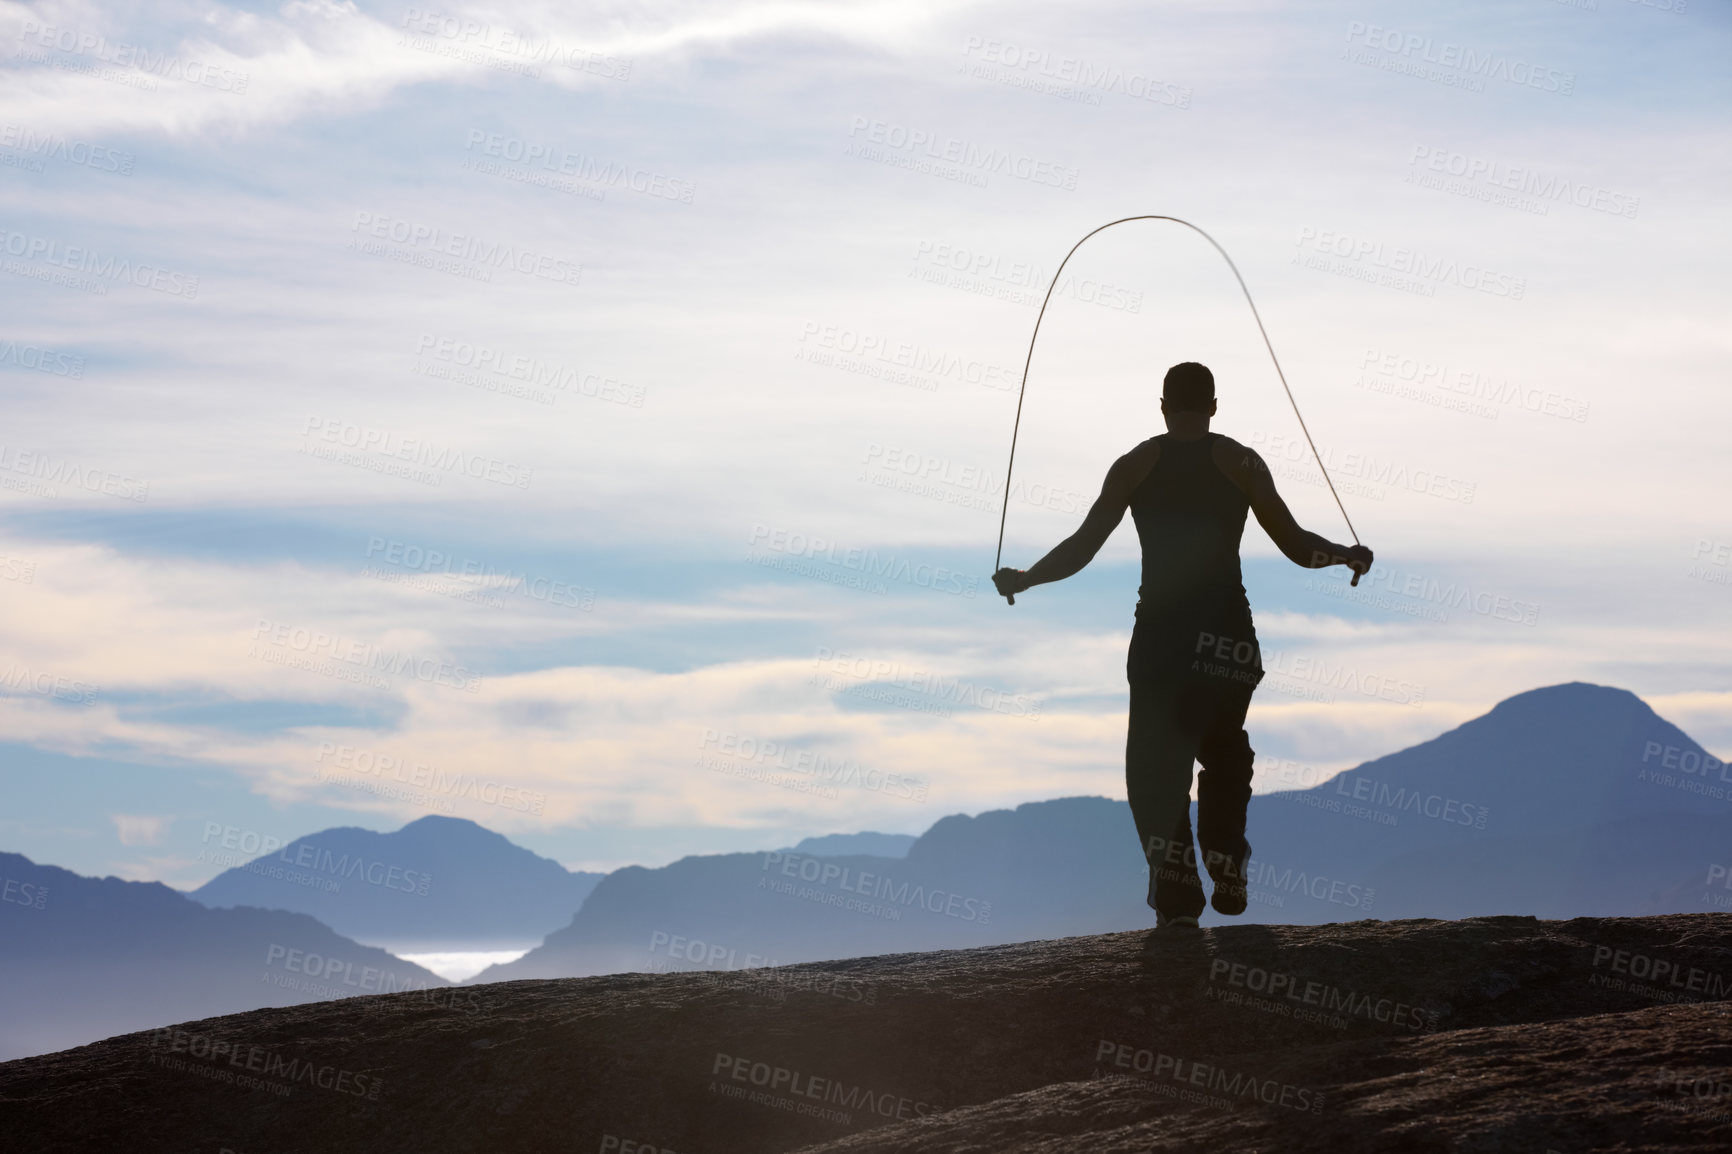 Buy stock photo Rearview of a man skipping on a mountain top